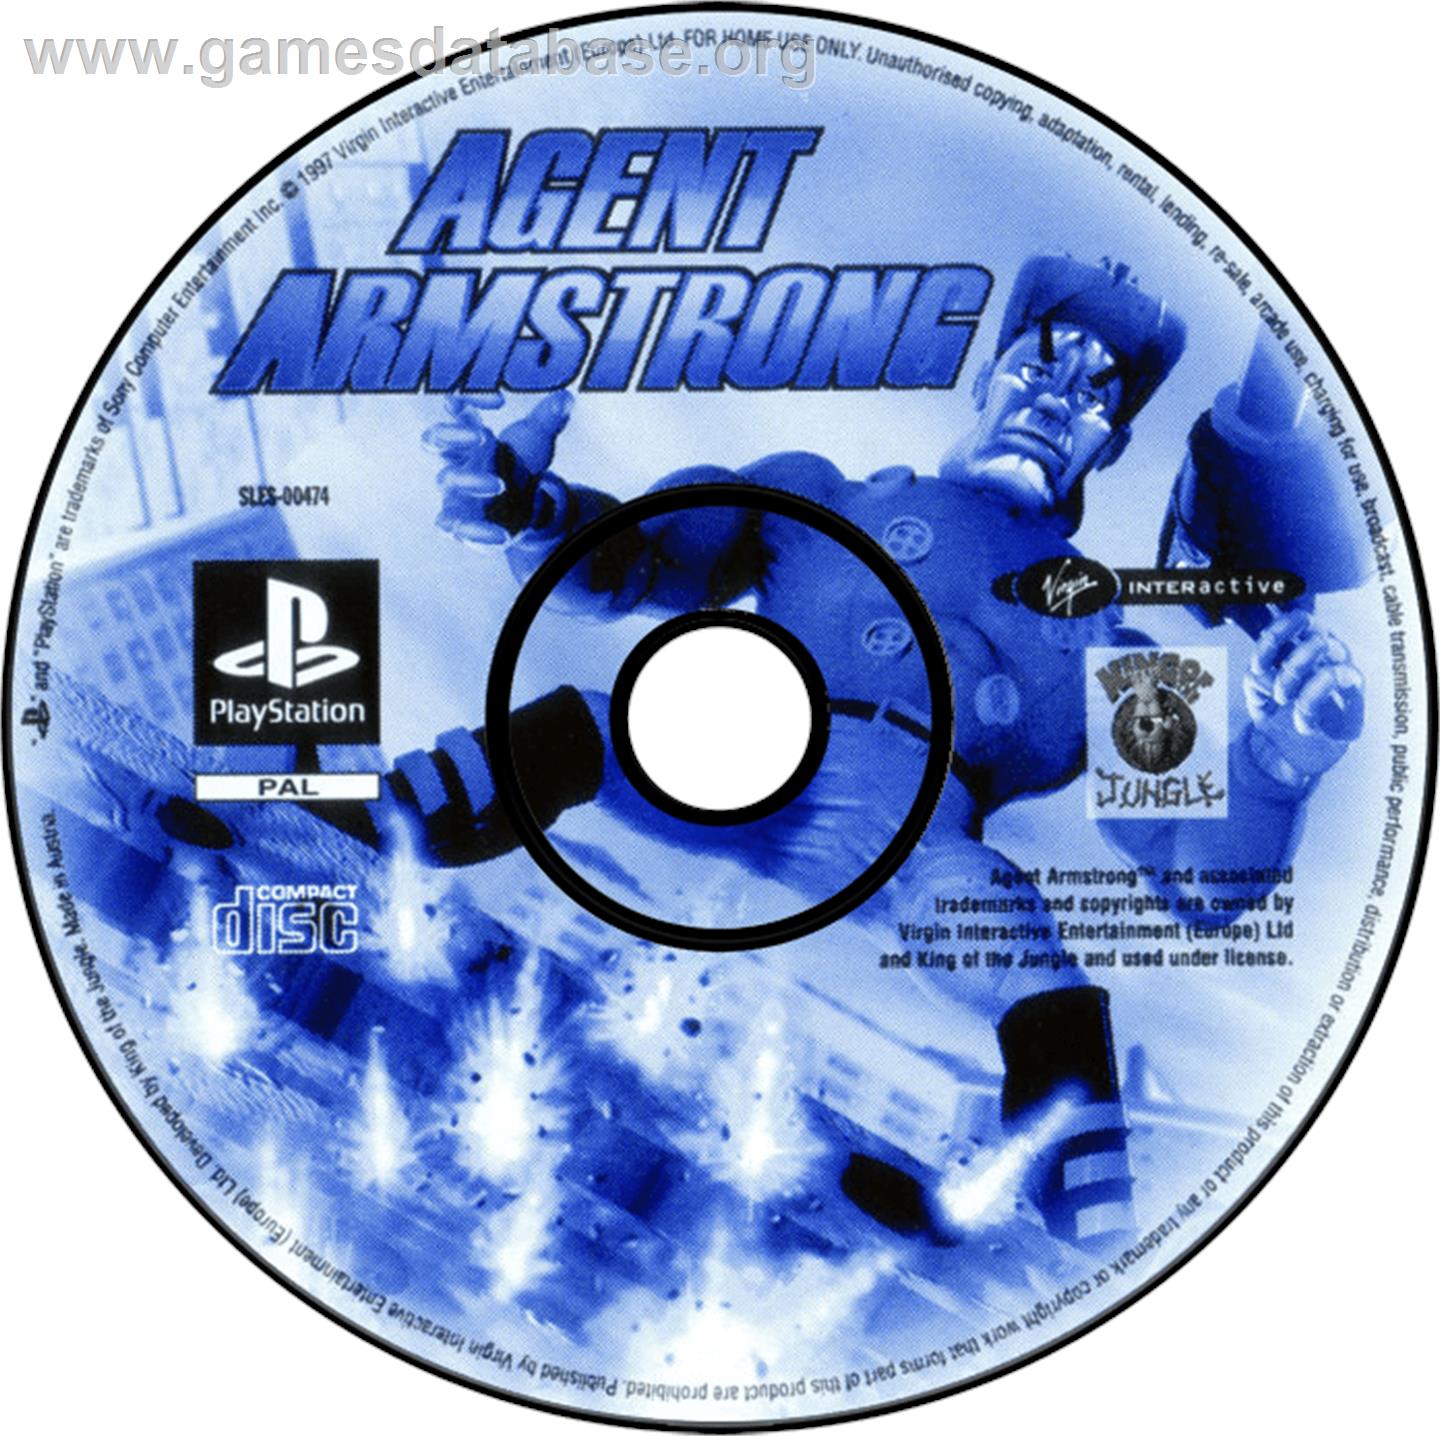 Agent Armstrong - Sony Playstation - Artwork - Disc